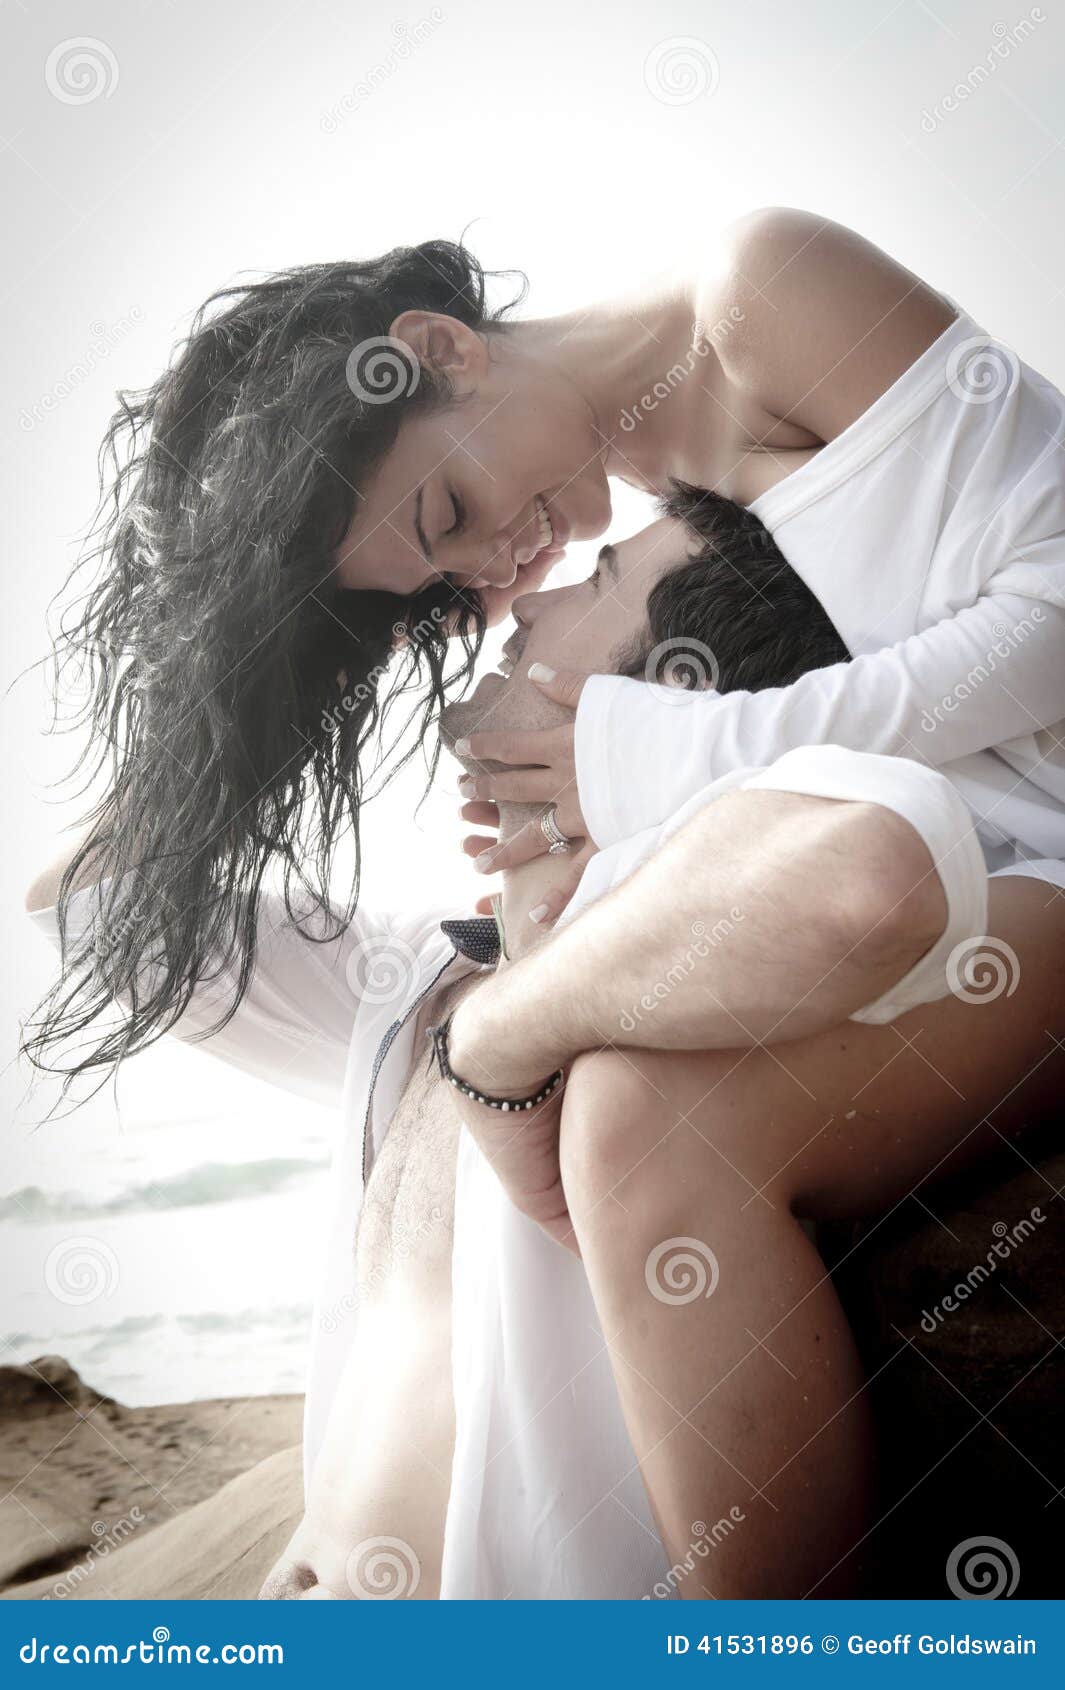 young attractive couple flirting outdoors on beach rocks